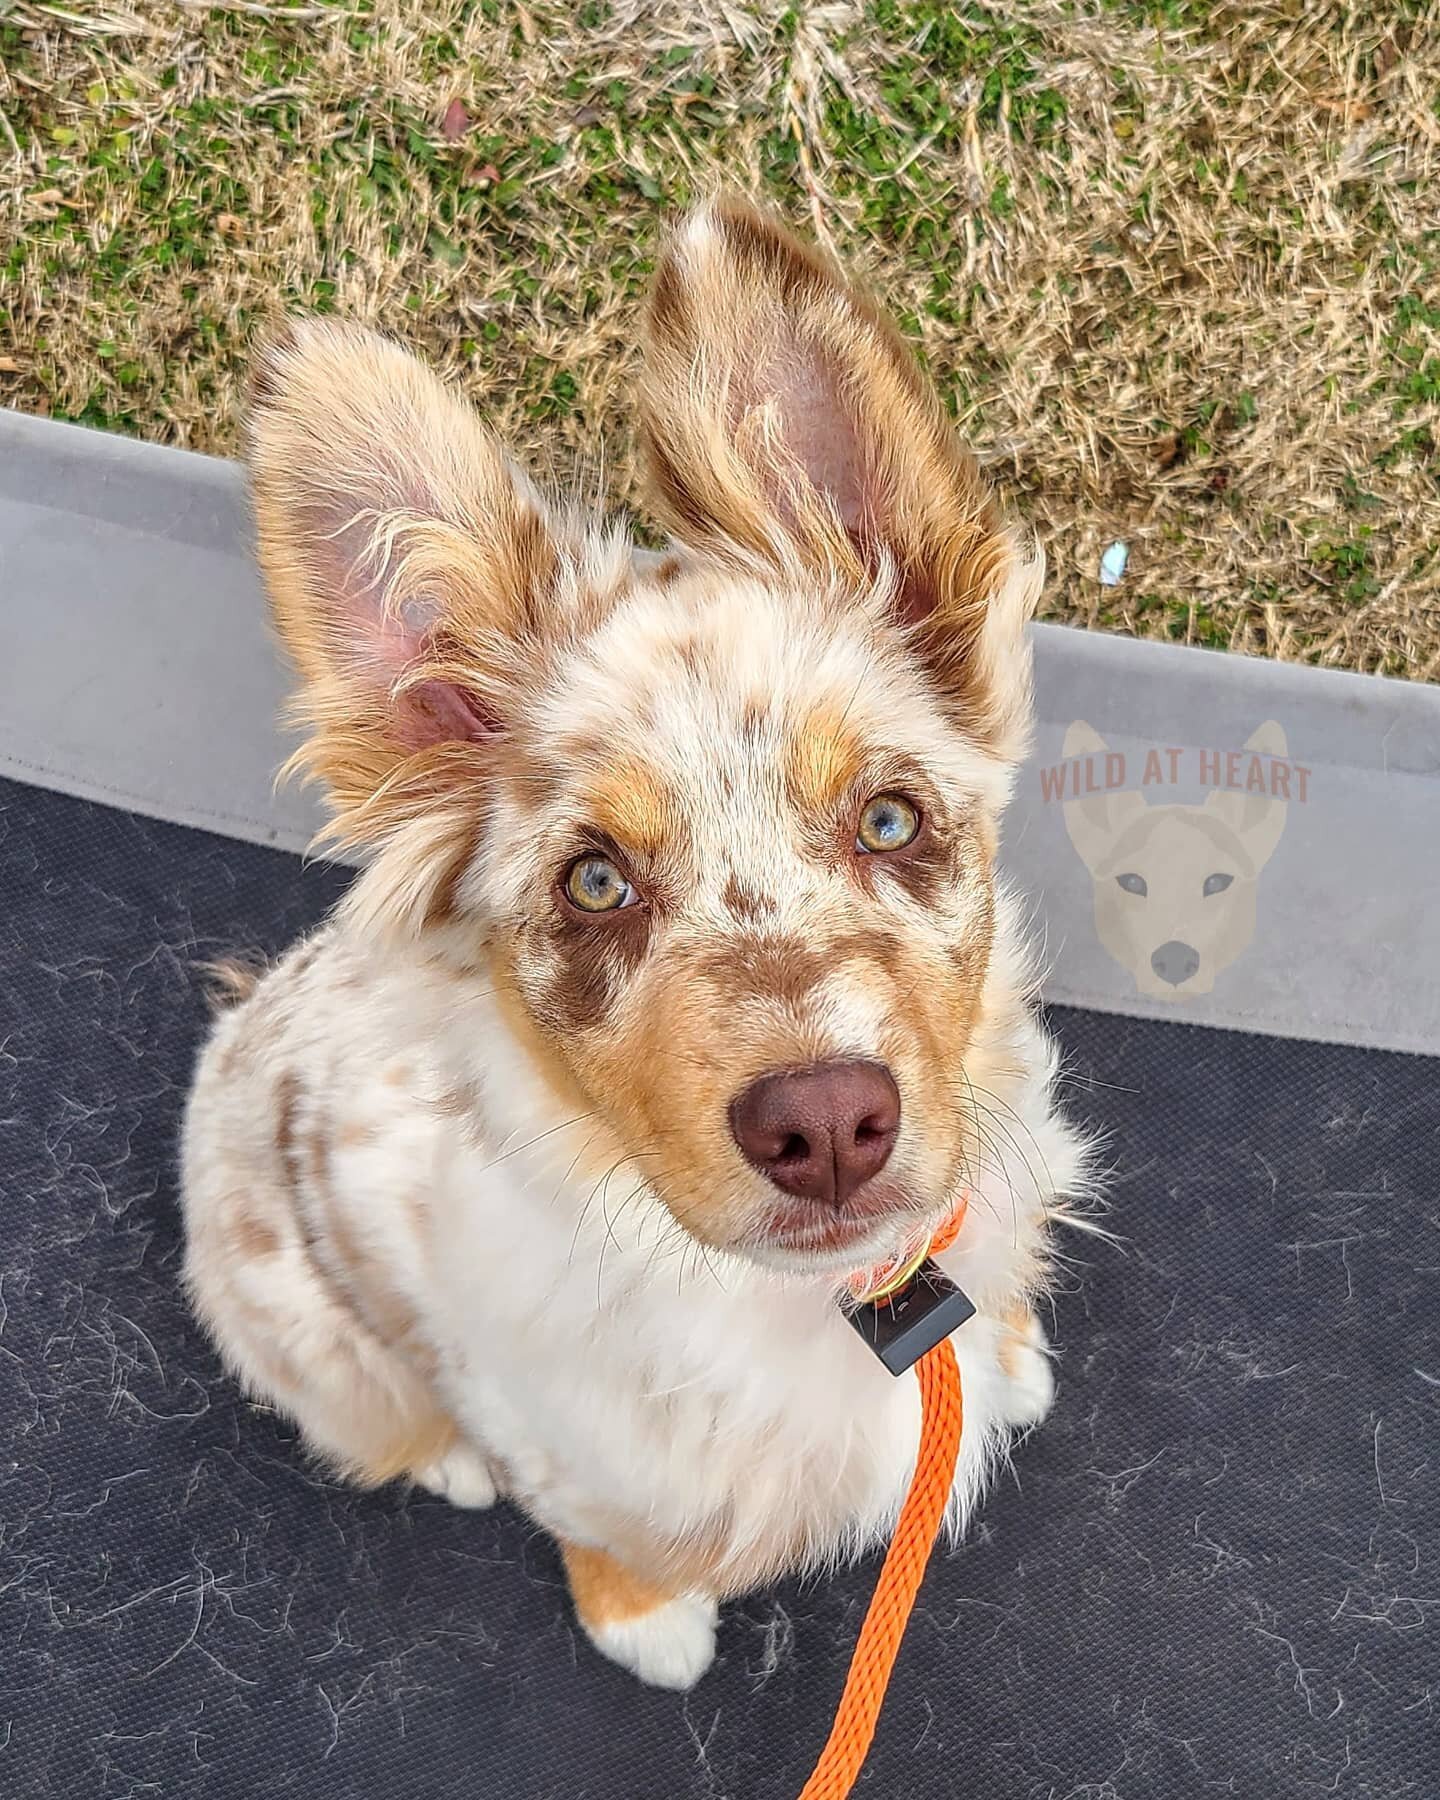 🐡SYDNEY🐡

This 15 week old Australian shepherd puppy is  here with us to lay a solid foundation for engagement, obedience, and manners! She will be coming back in a few months to complete her training with off leash freedom! 

Sydney lives with a s